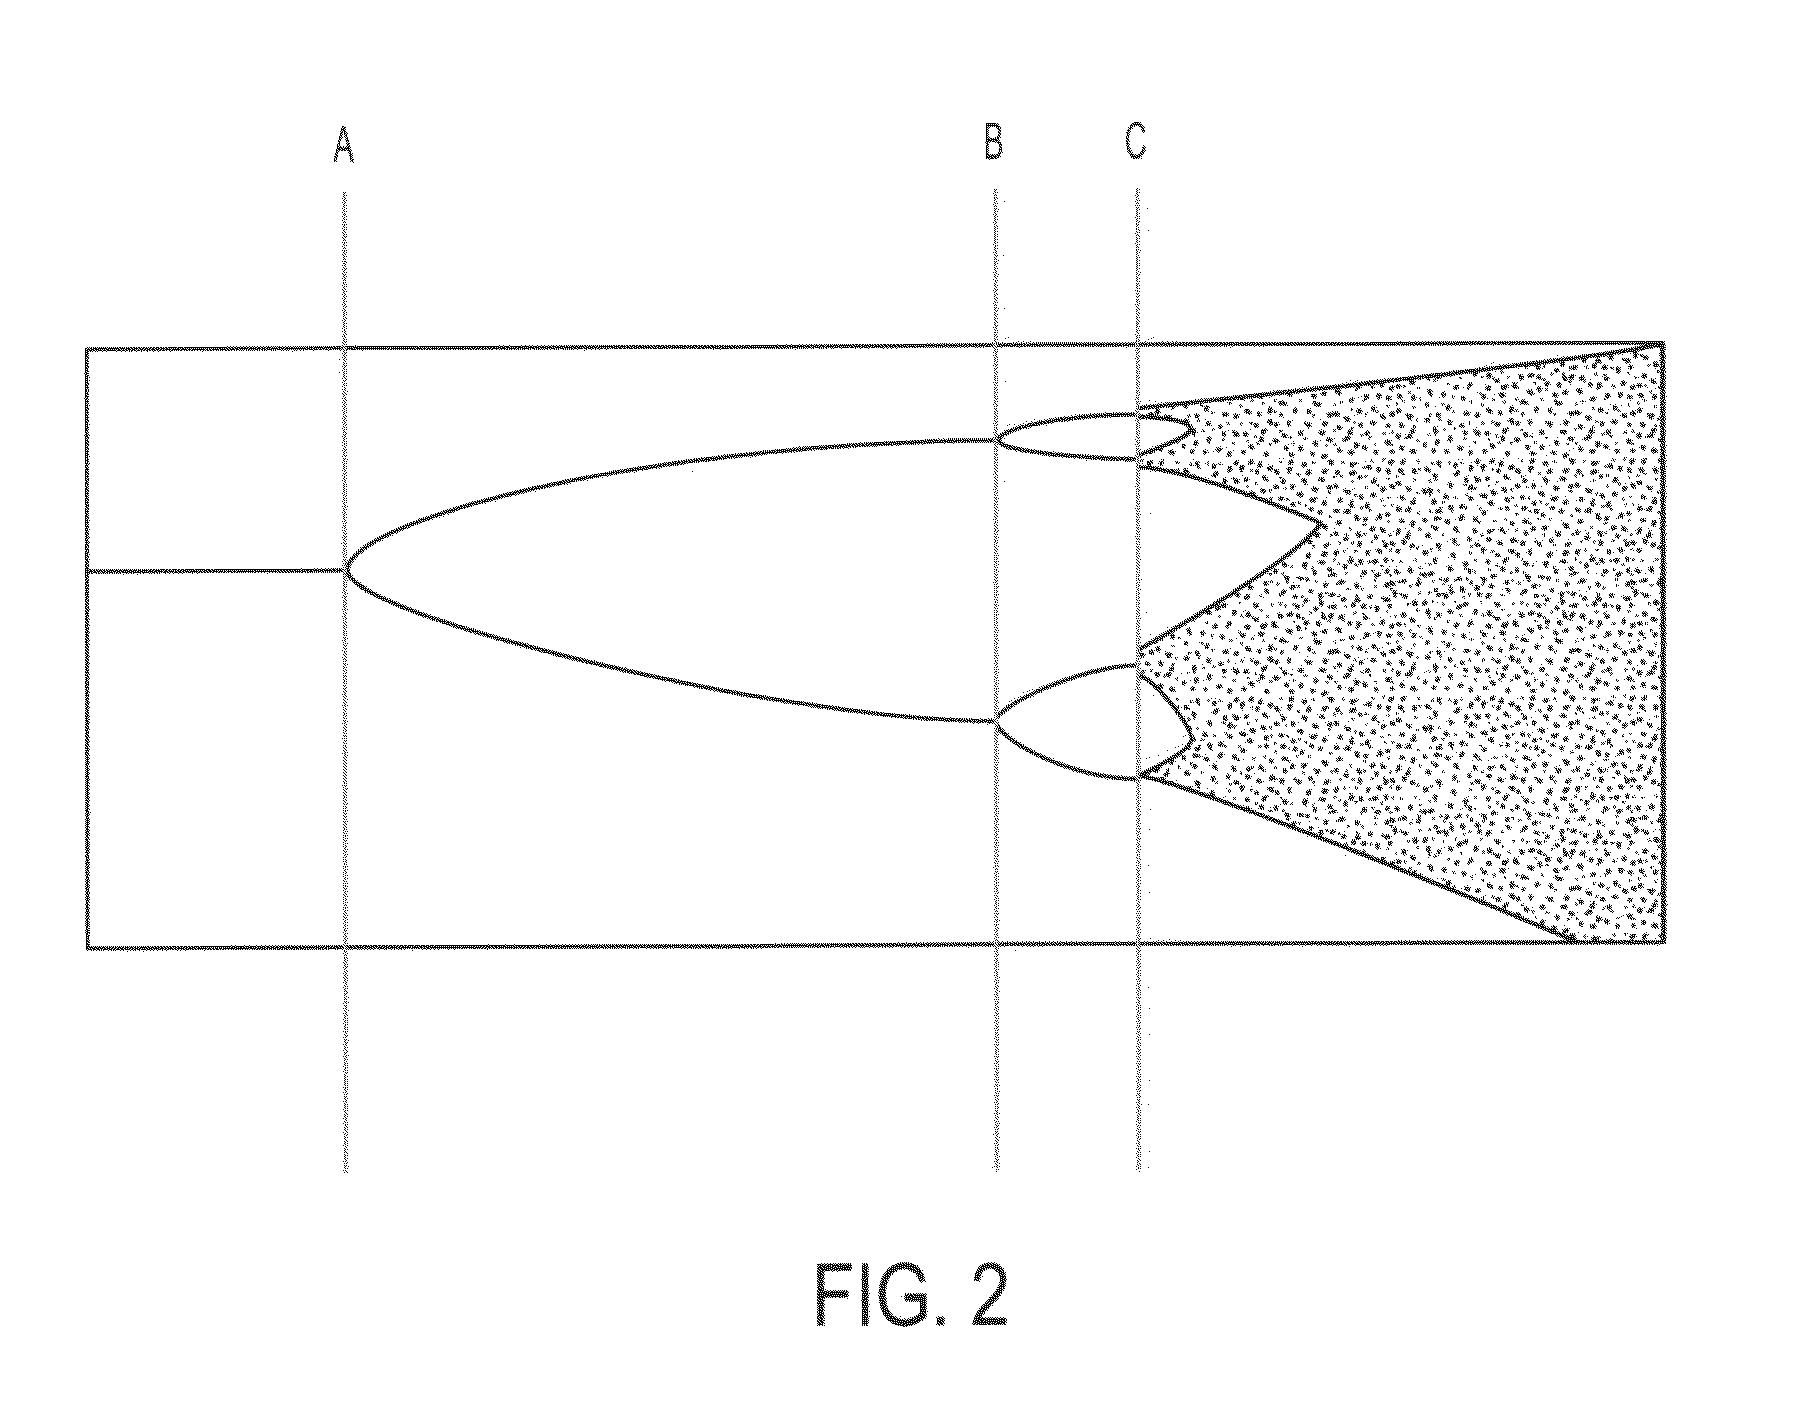 System and method for texture visualization and image analysis to differentiate between malignant and benign lesions